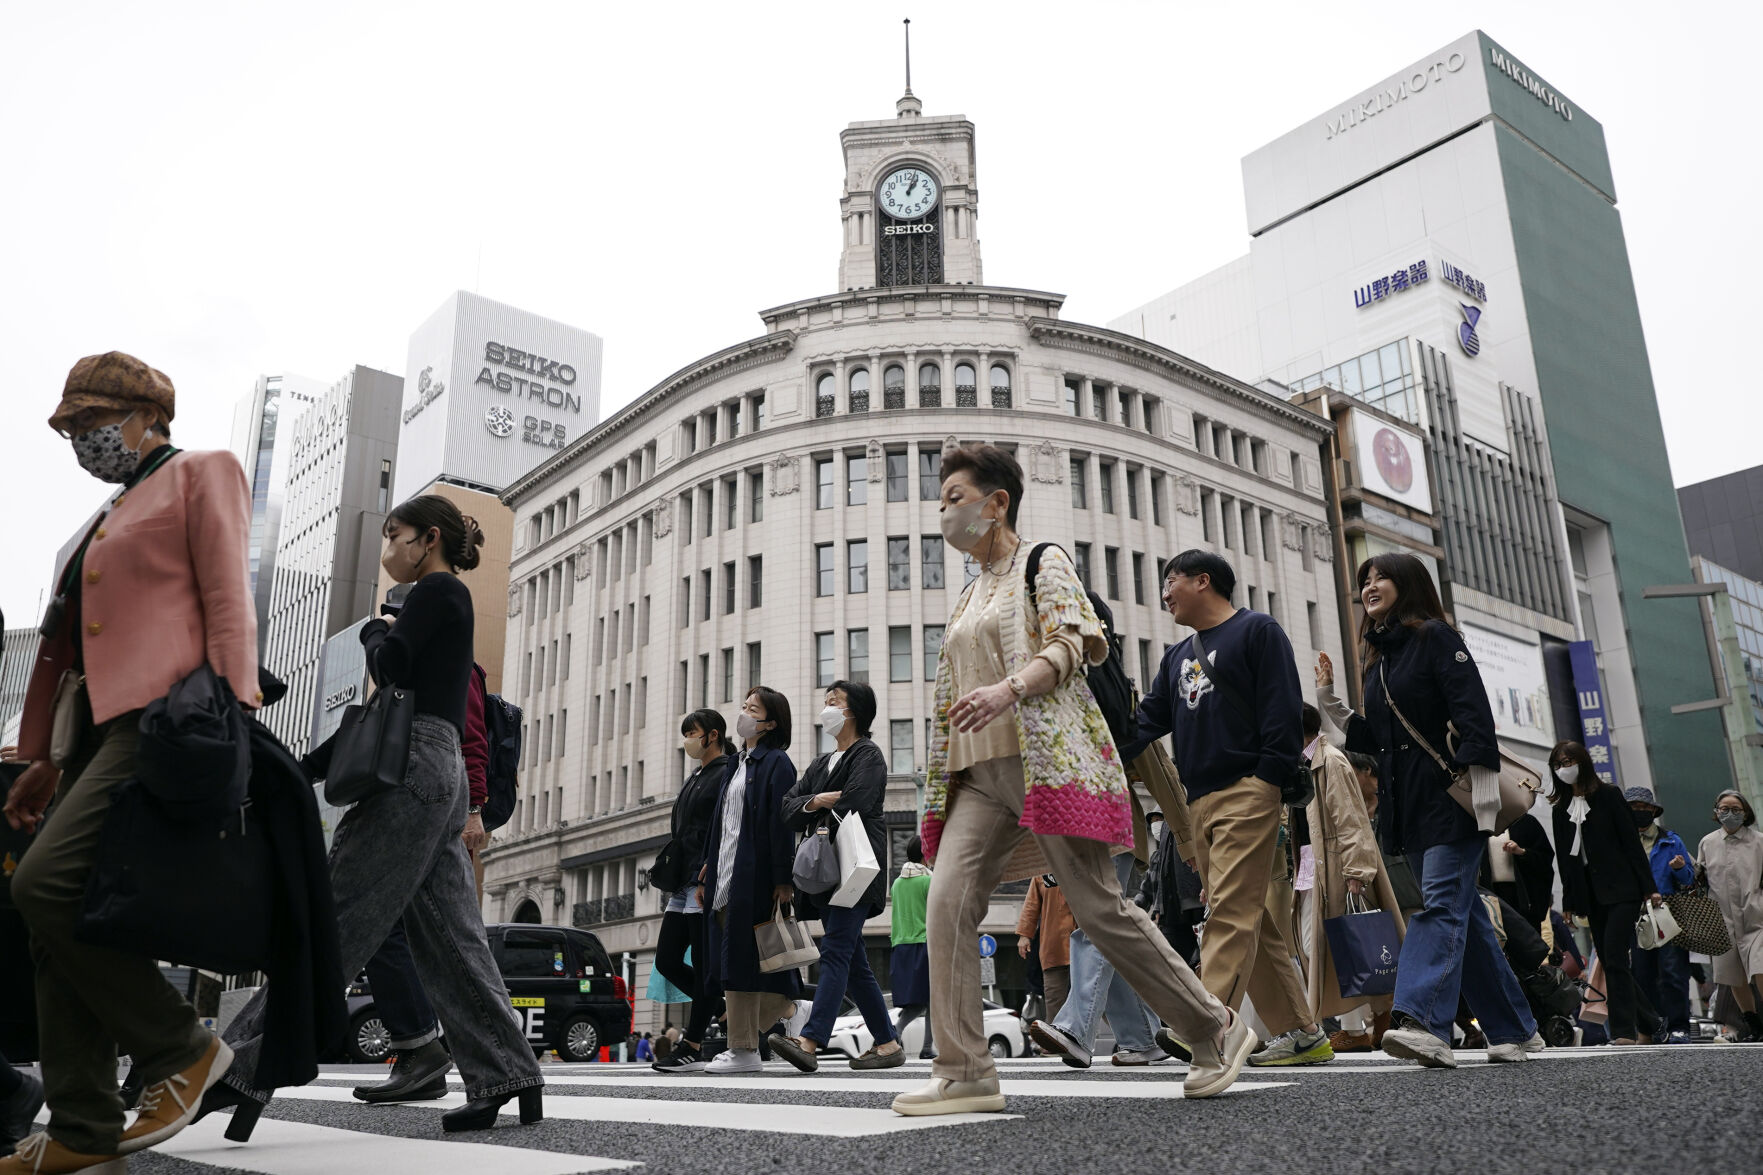 <p>FILE - People walk across a pedestrian crossing in Ginza shopping district in Tokyo on March 31, 2023. Japan’s economy slipped into a contraction in the third quarter, decreasing at an annual pace of 2.1% as consumption and investments shrank, the government reported Wednesday, Nov. 15, 2023. (AP Photo/Eugene Hoshiko, File)</p>   PHOTO CREDIT: Eugene Hoshiko 